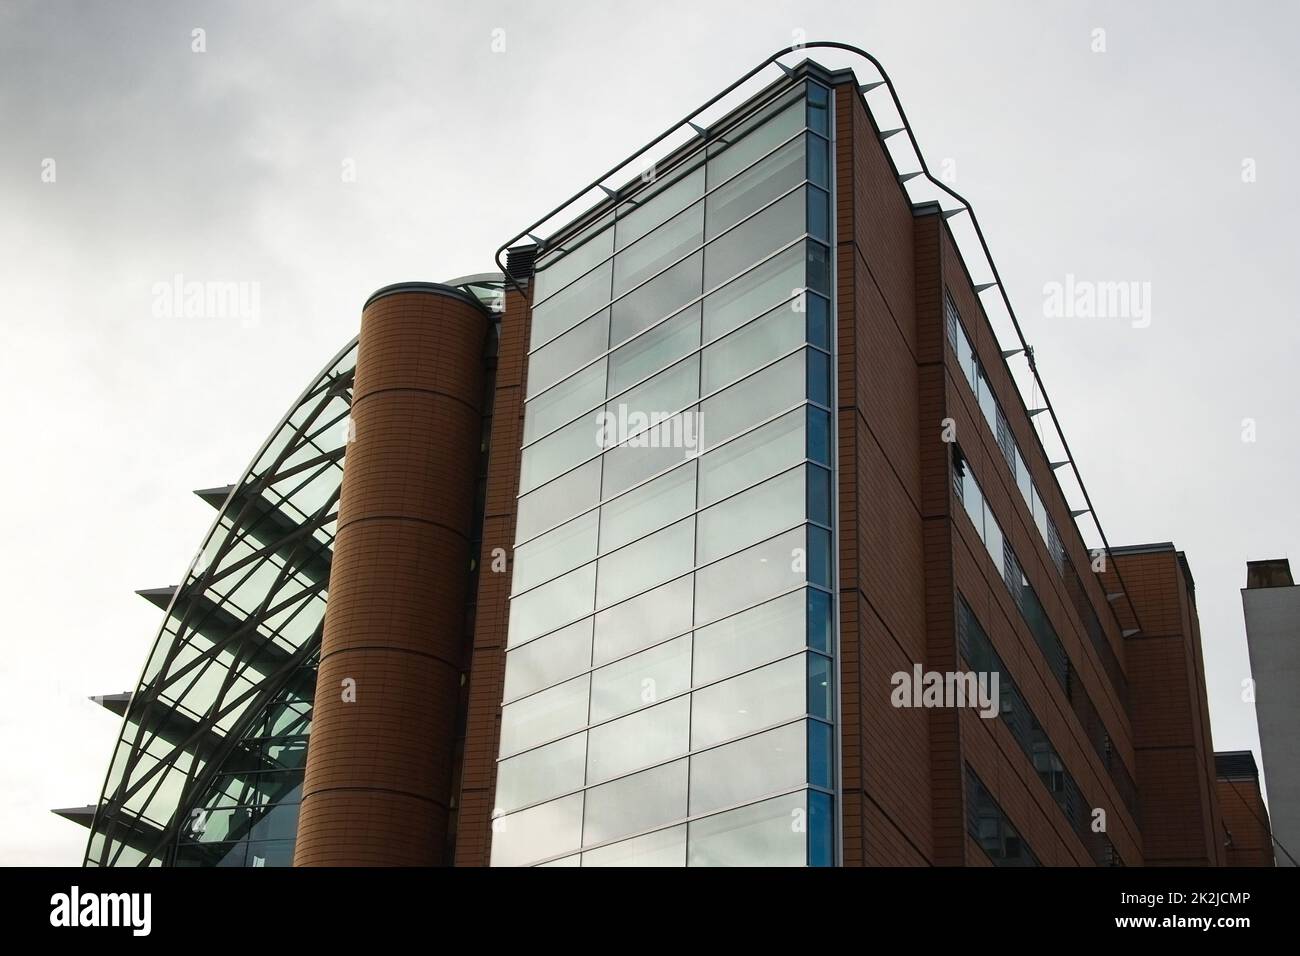 London, United Kingdom - November 25th, 2006: Architecture on modern east wing of St Thomas' Hospital (reconstructed in 1950s) with gray overcast sky in background. Stock Photo